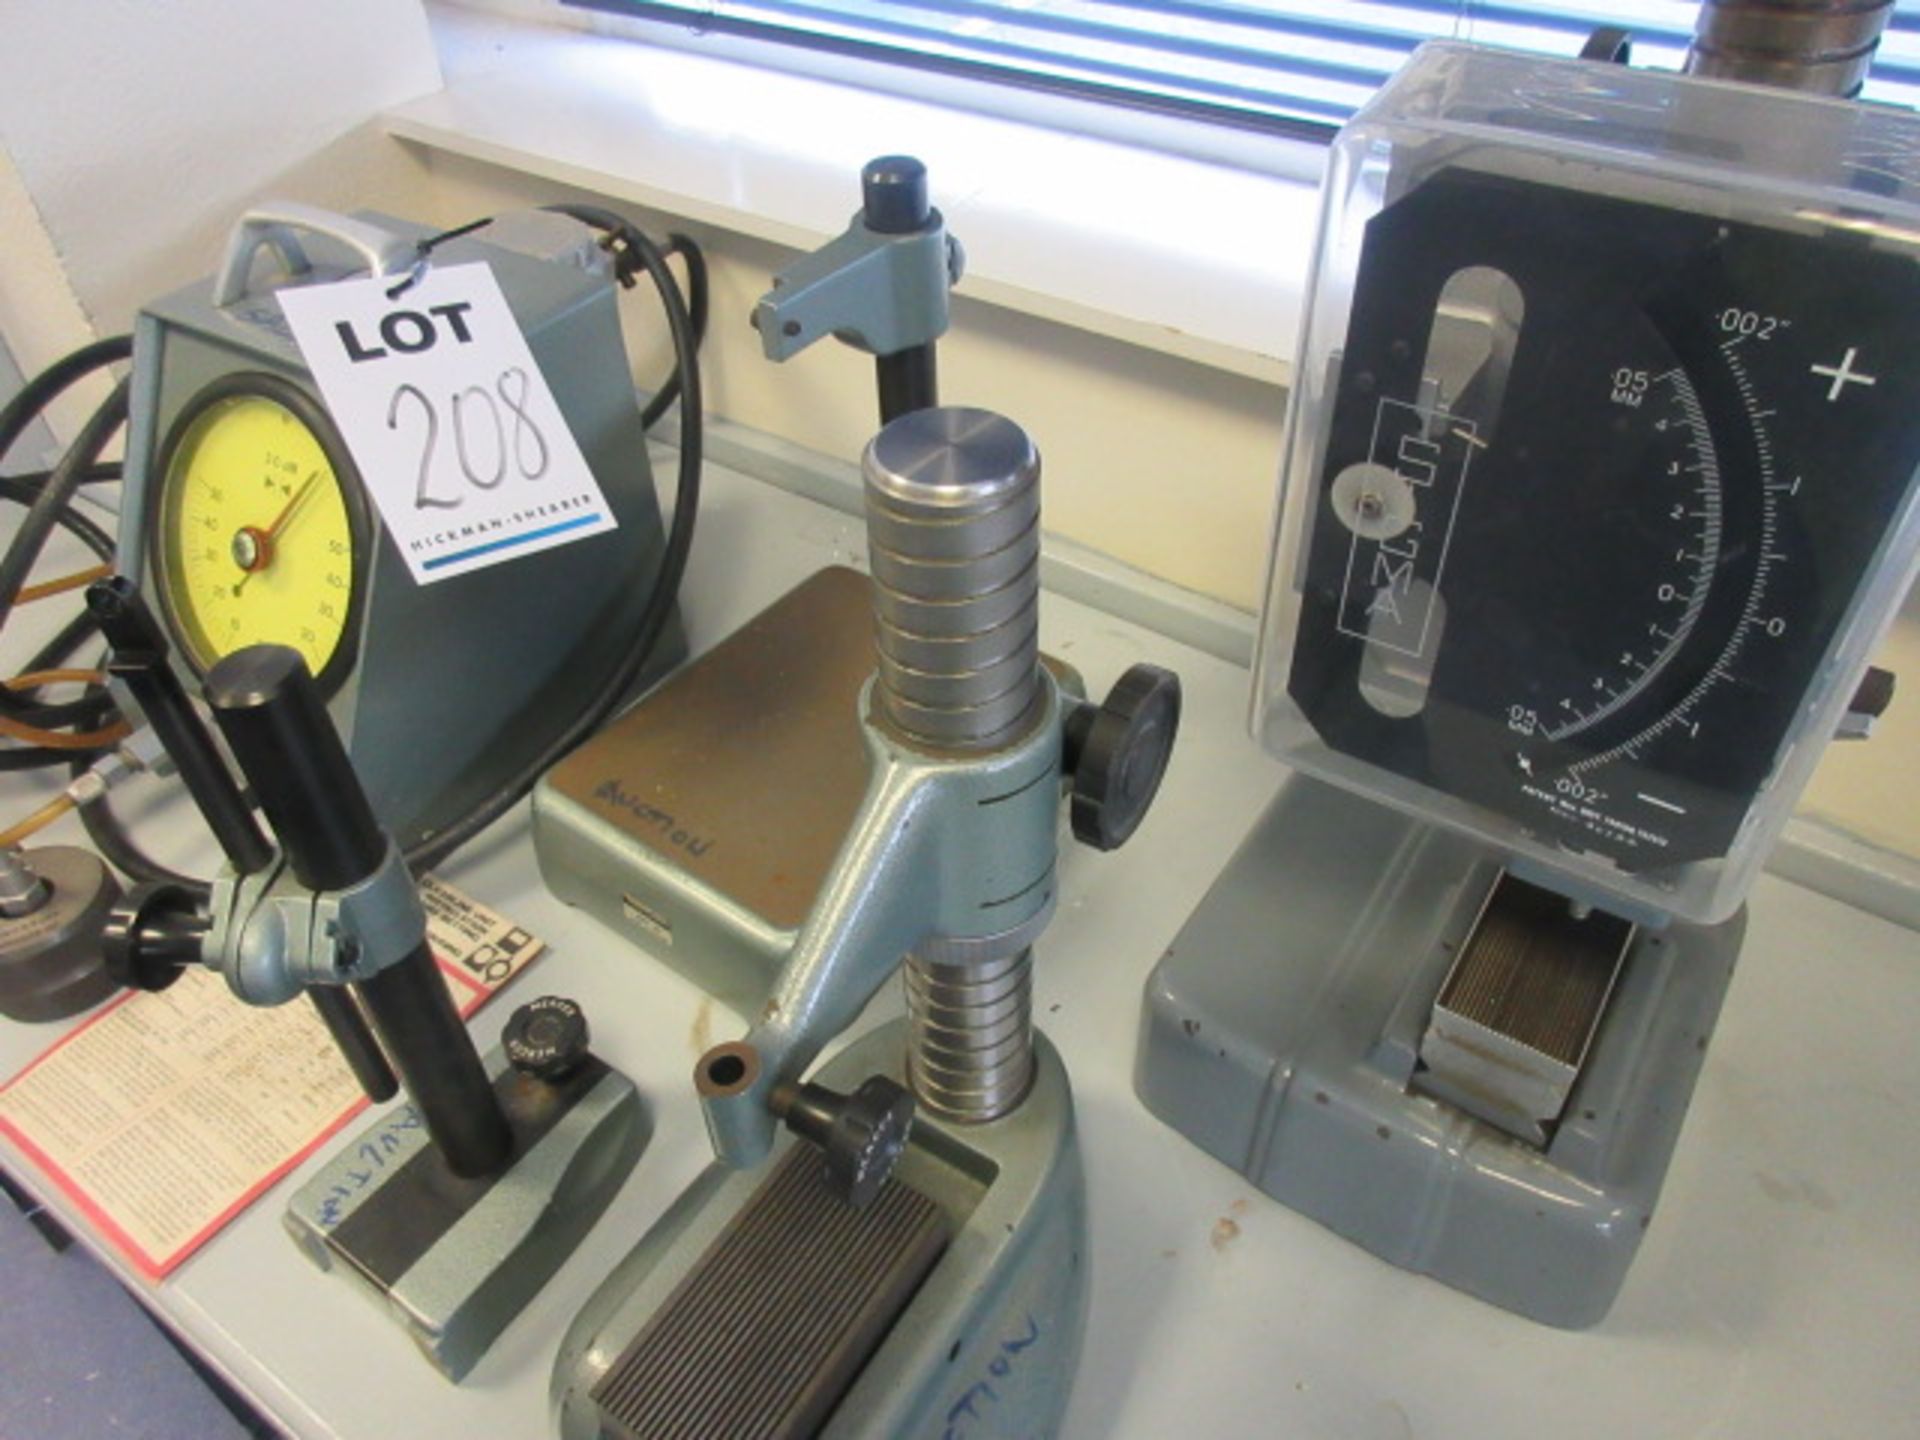 THREE GAUGE STANDS, A SIGMA IMPERIAL/METRIC COMPARITOR AND A MERCER CLEARLINE 2 AIR BORE GAUGE - Image 2 of 2